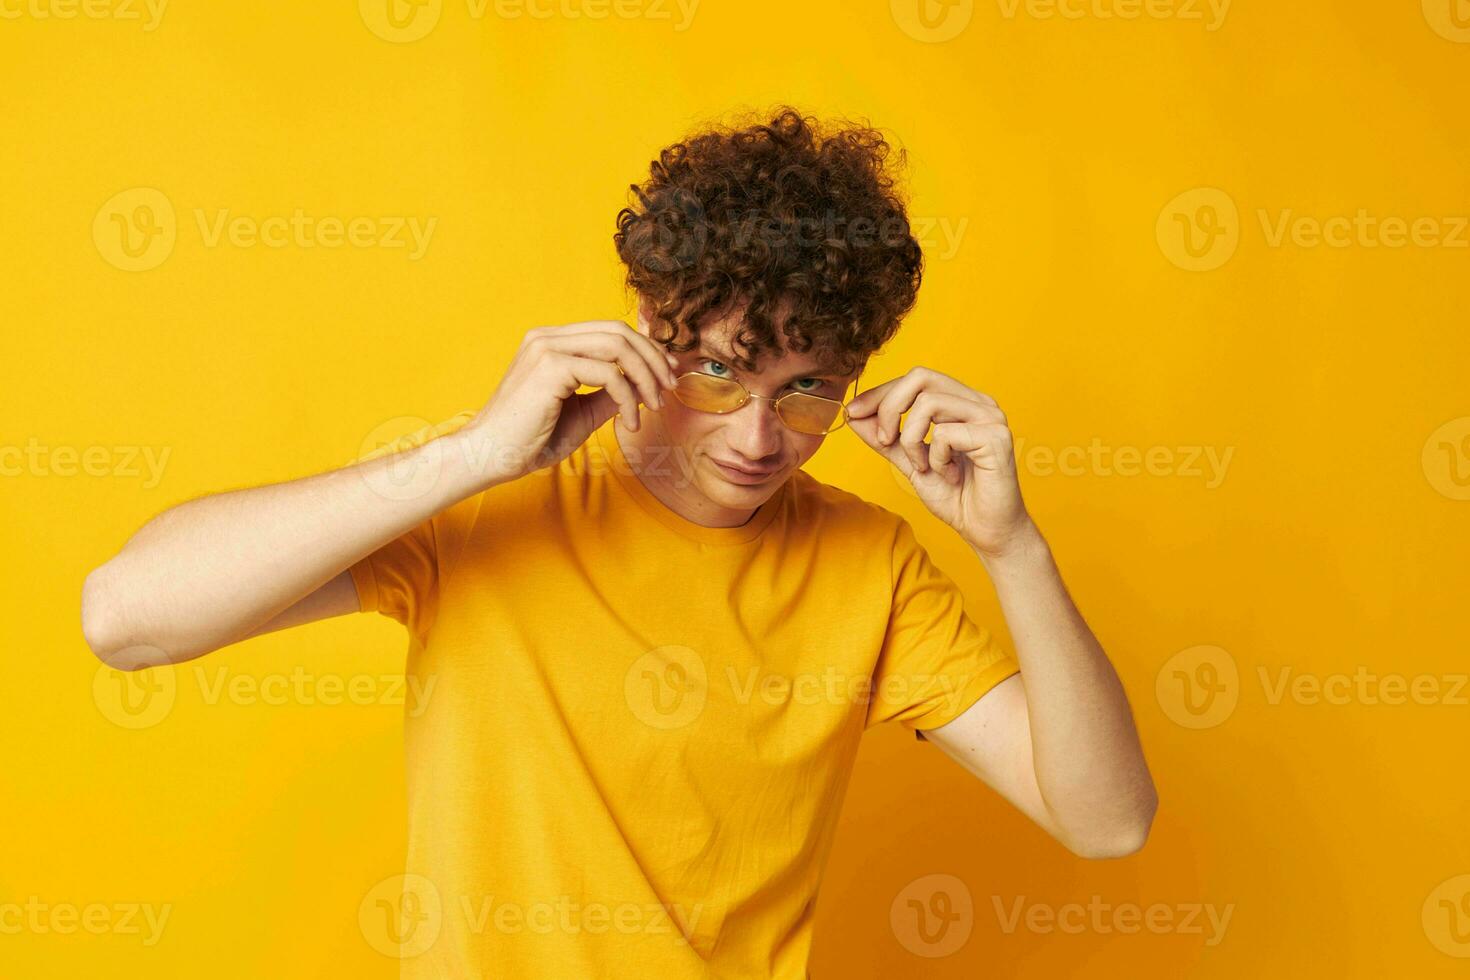 Young curly-haired man yellow t-shirt glasses fashion hand gestures monochrome shot photo